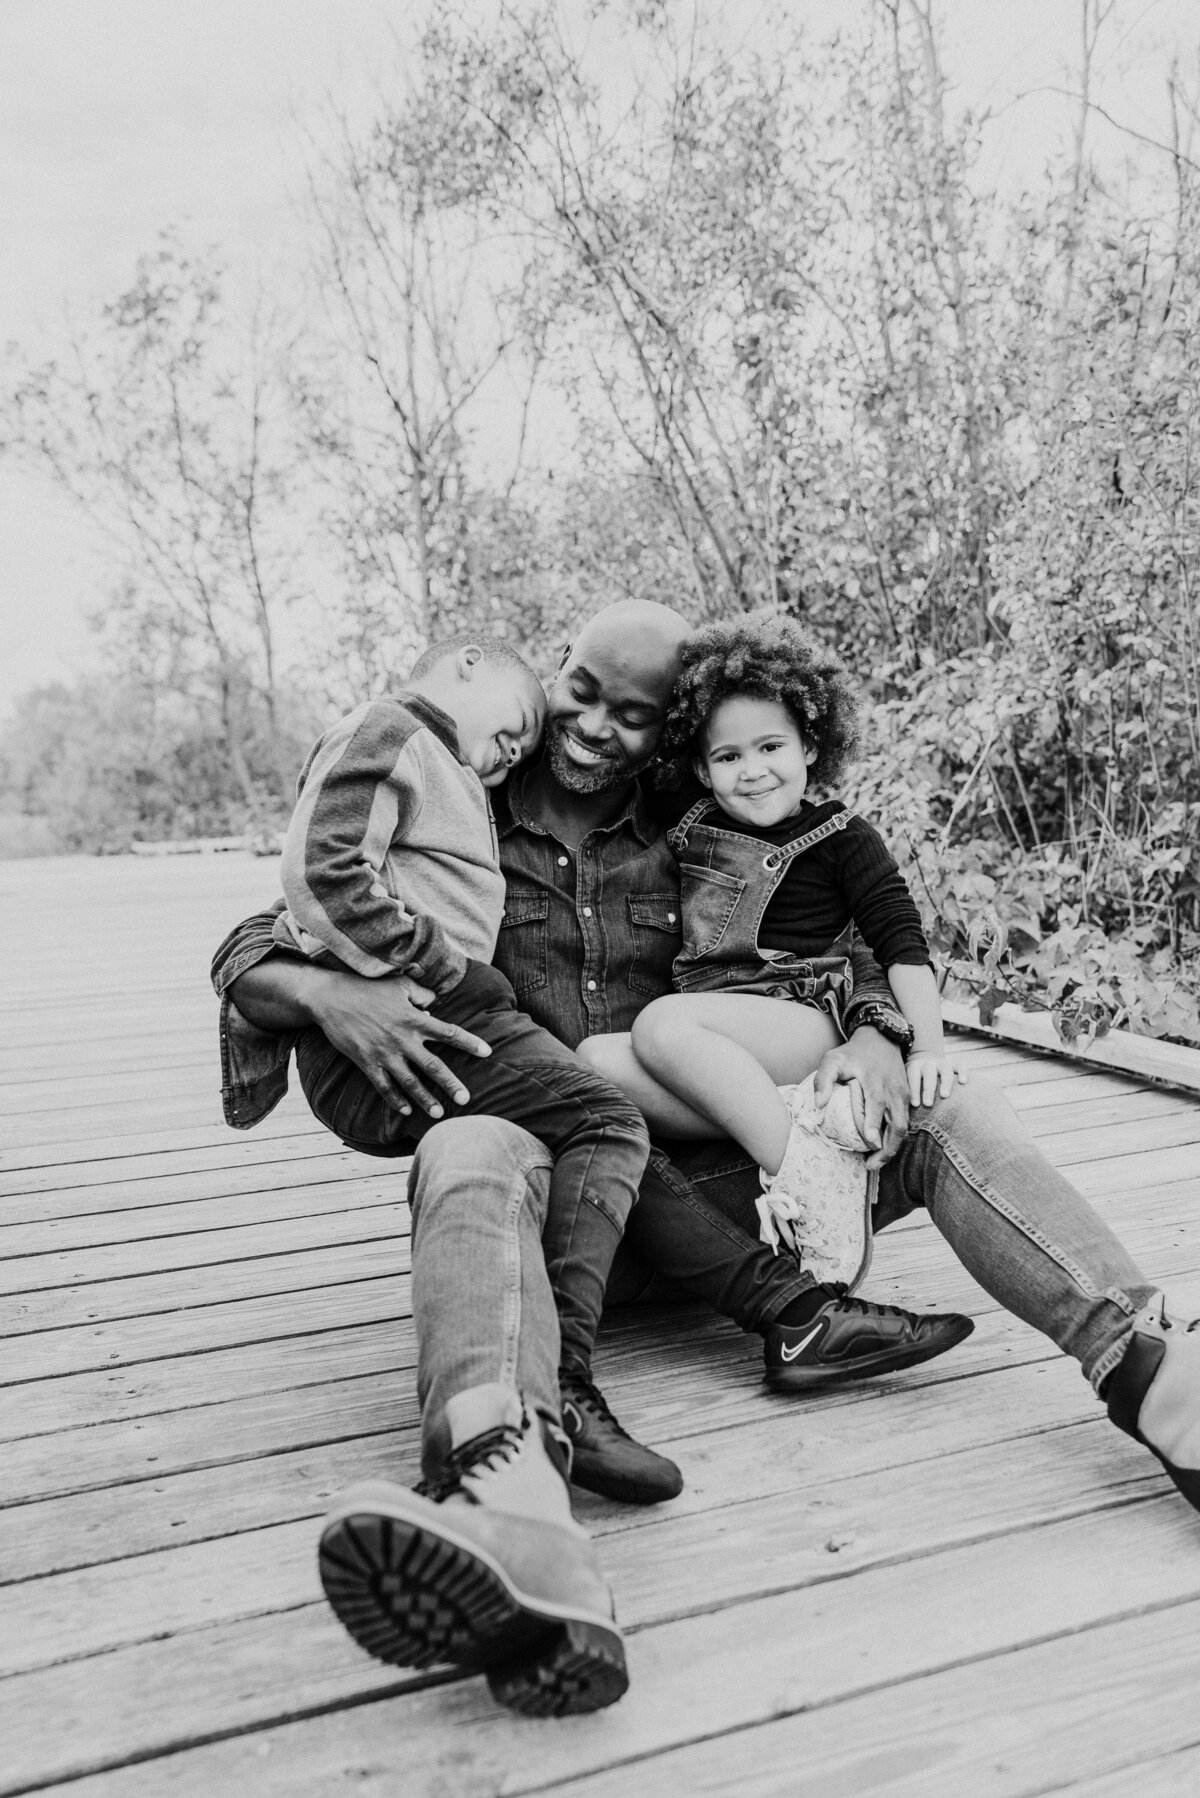 Radiate family moments in Minneapolis outdoor photography. Shannon Kathleen Photography captures the radiant essence of your family's connection. Reserve your session now!